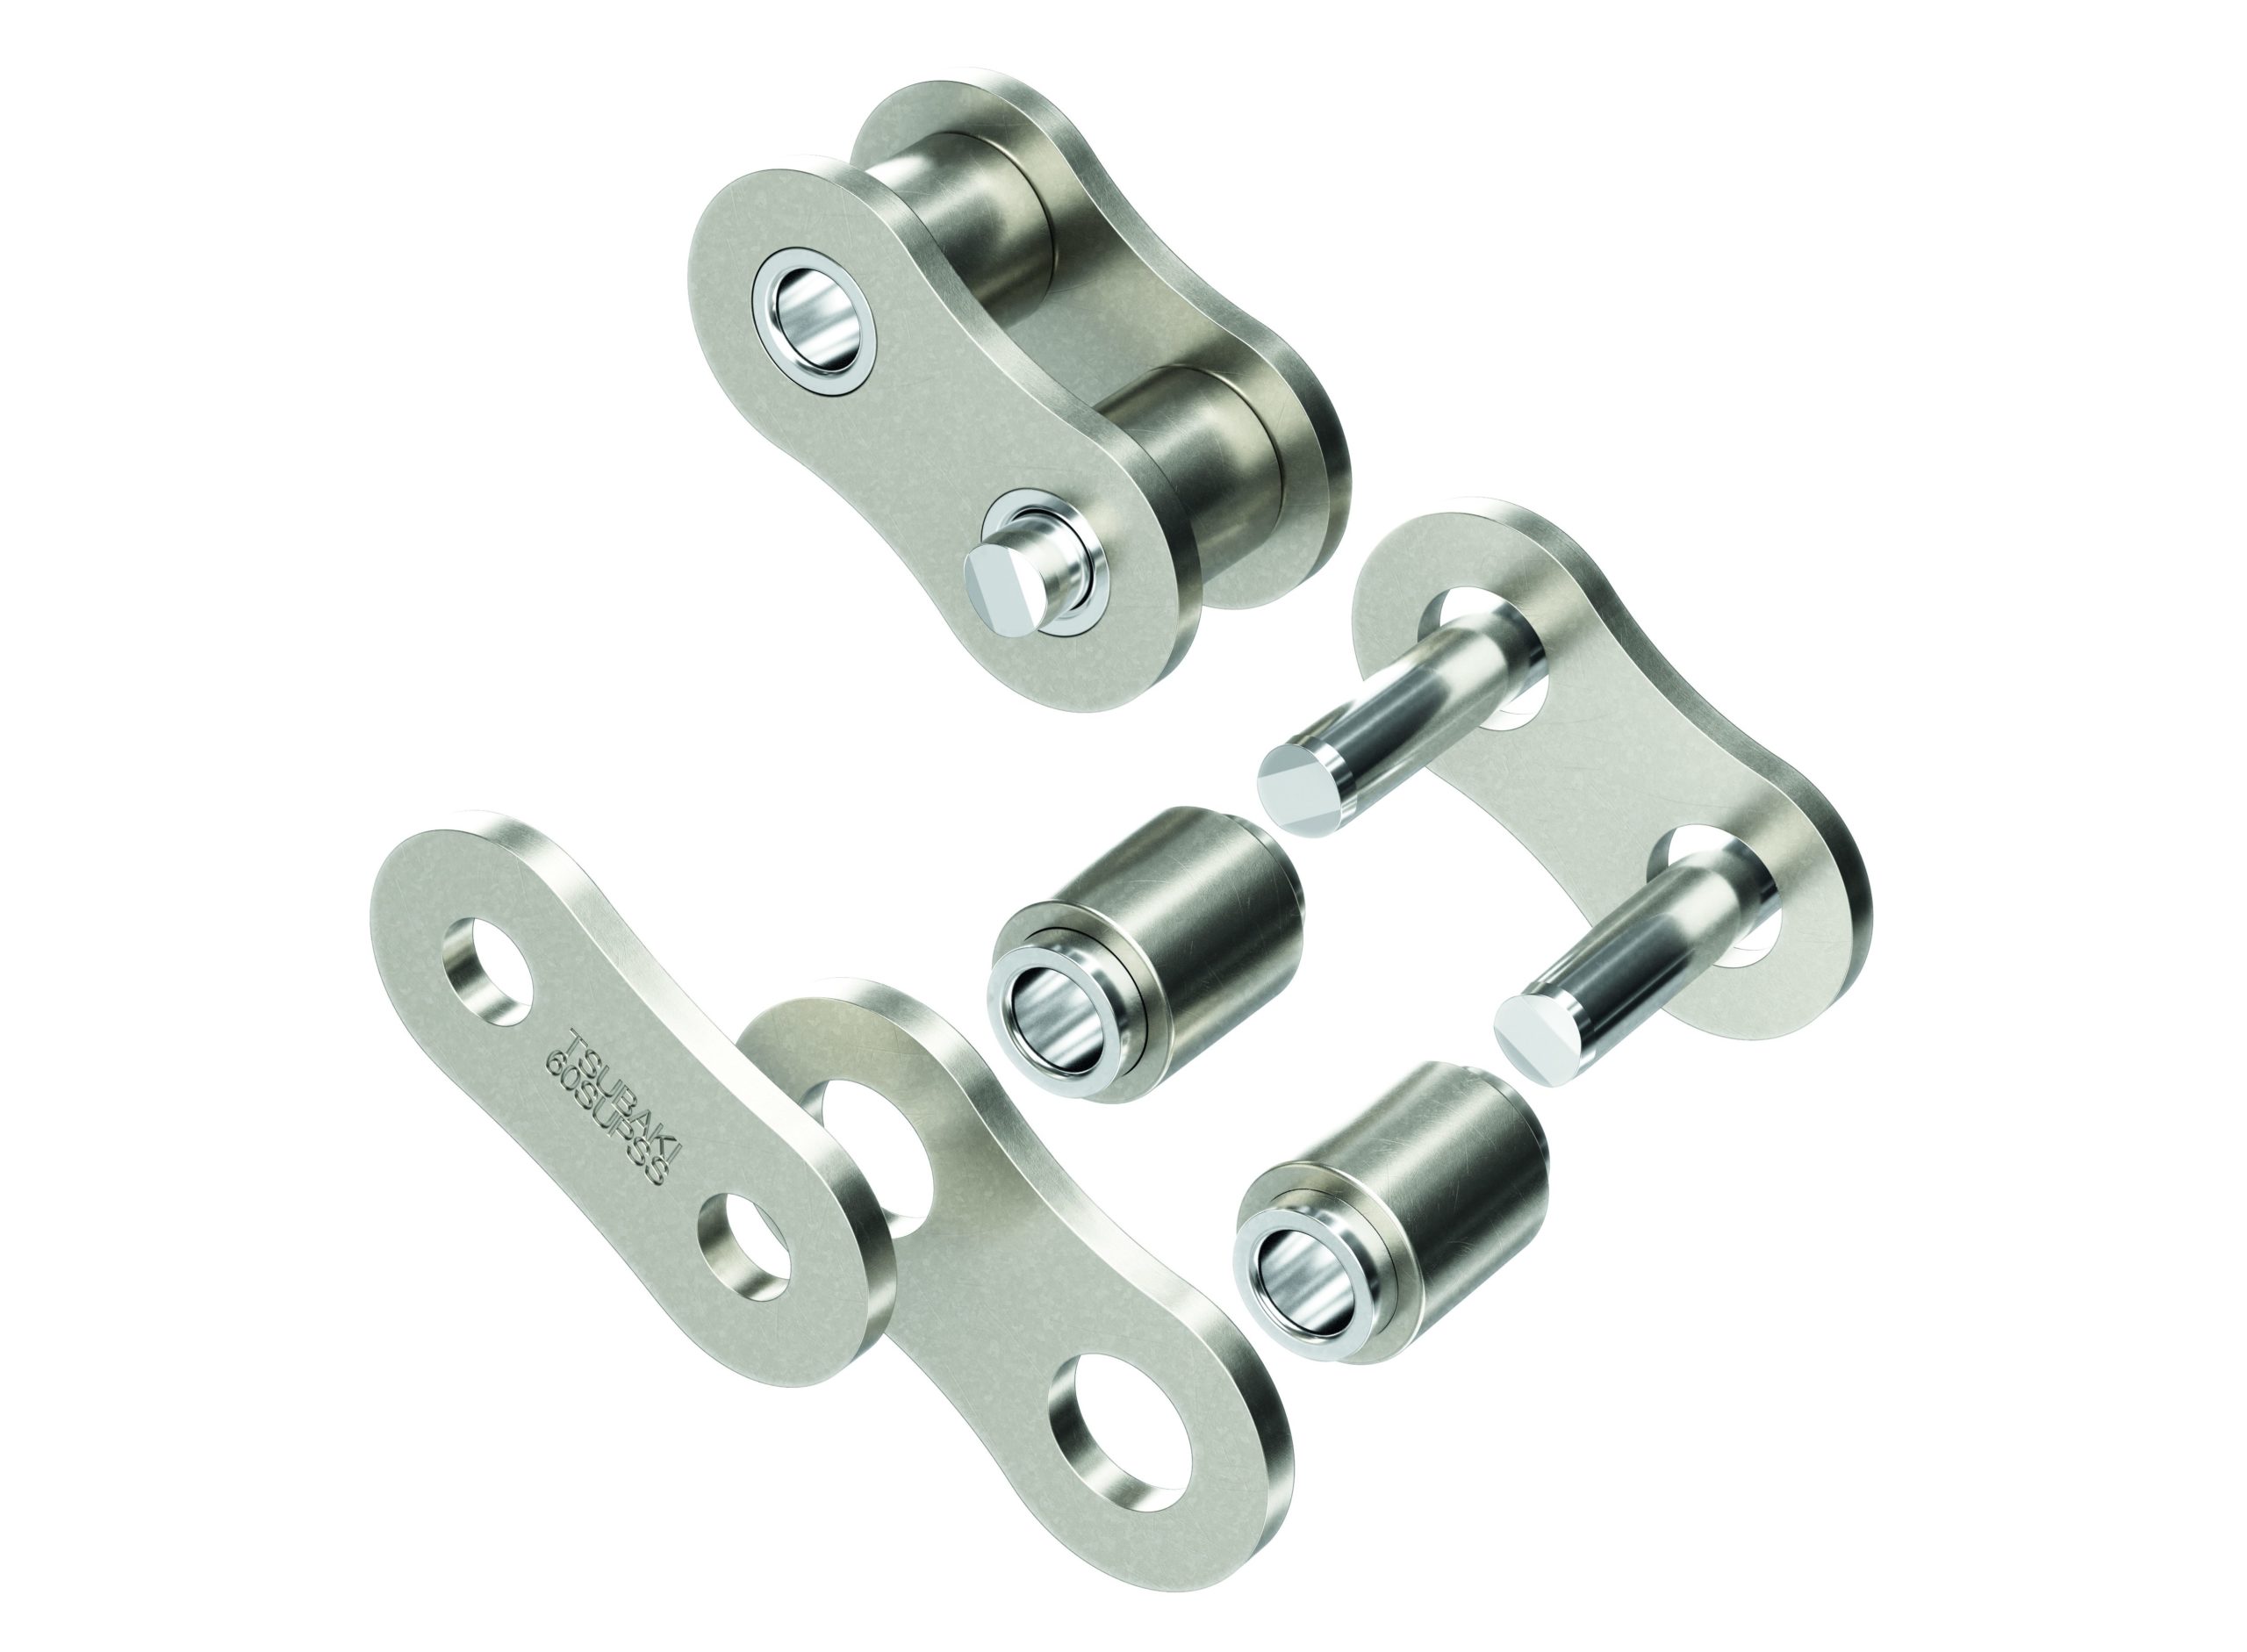 Super Stainless Chain for the Food & Beverage Industry